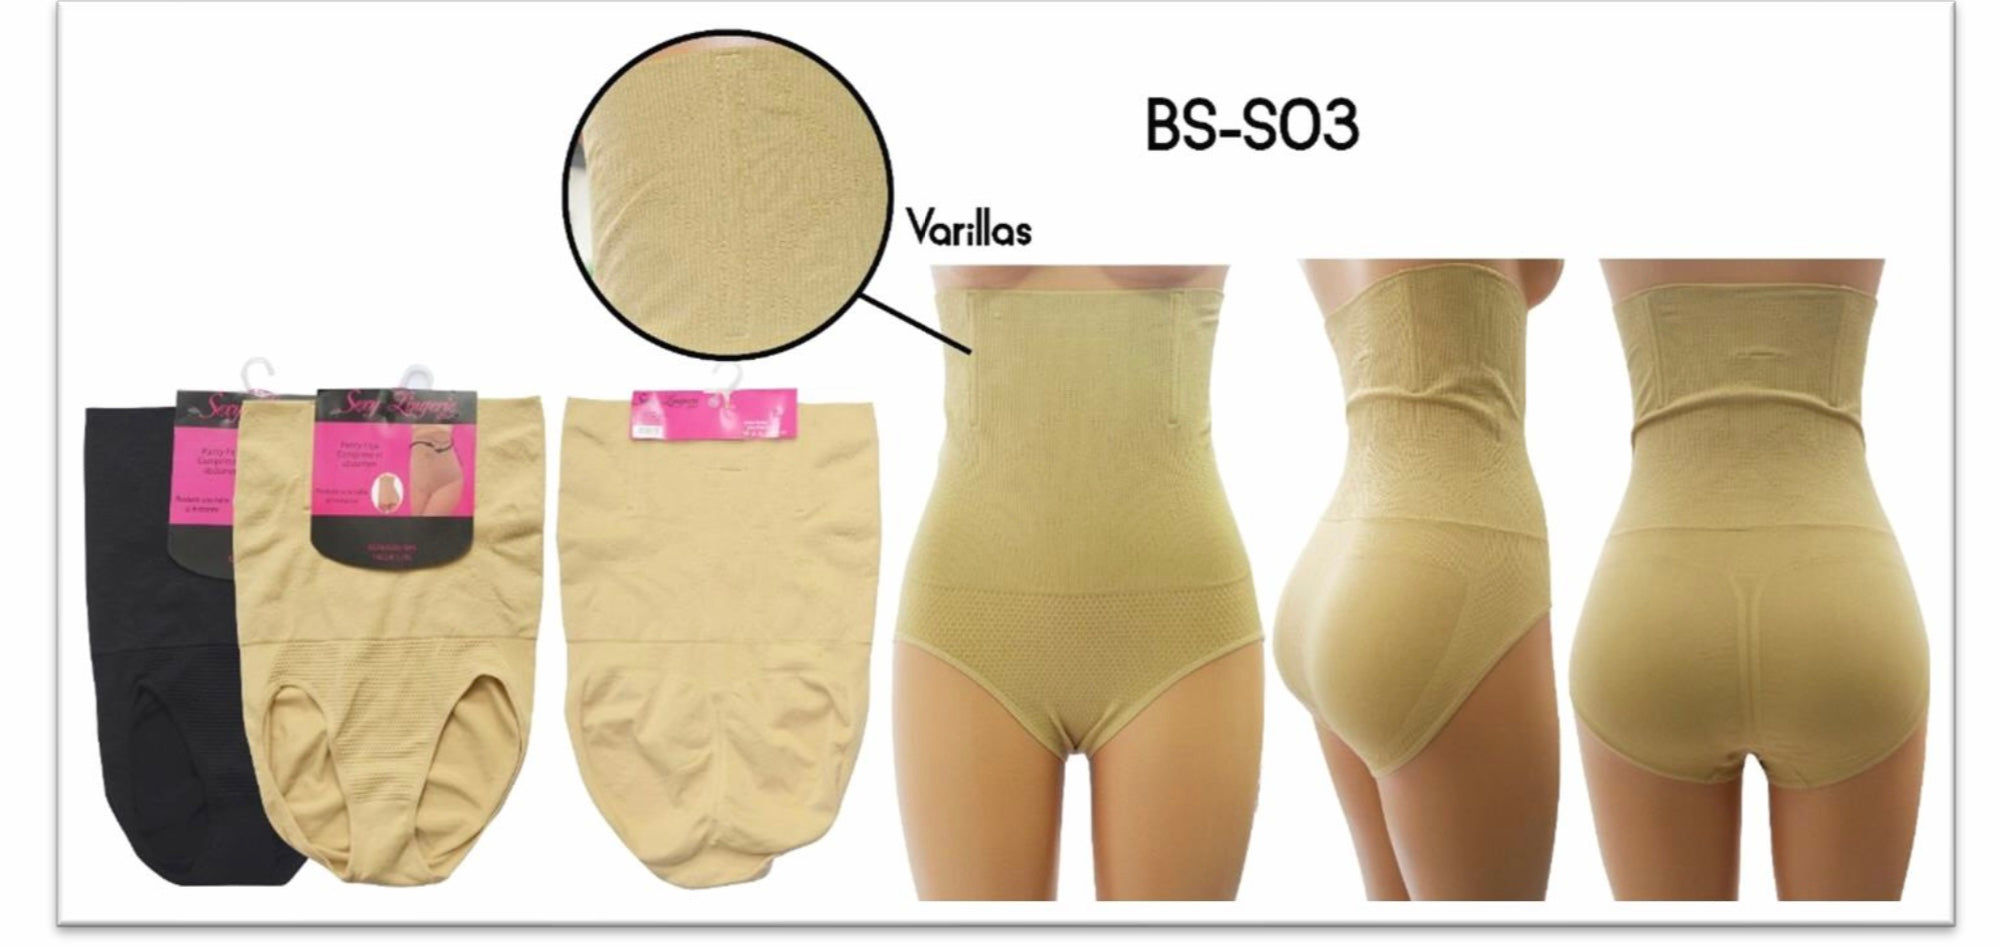 Sexy Columbian Reversible Panty Girdle Faja with Smart Compression Shape Contouring Fabric